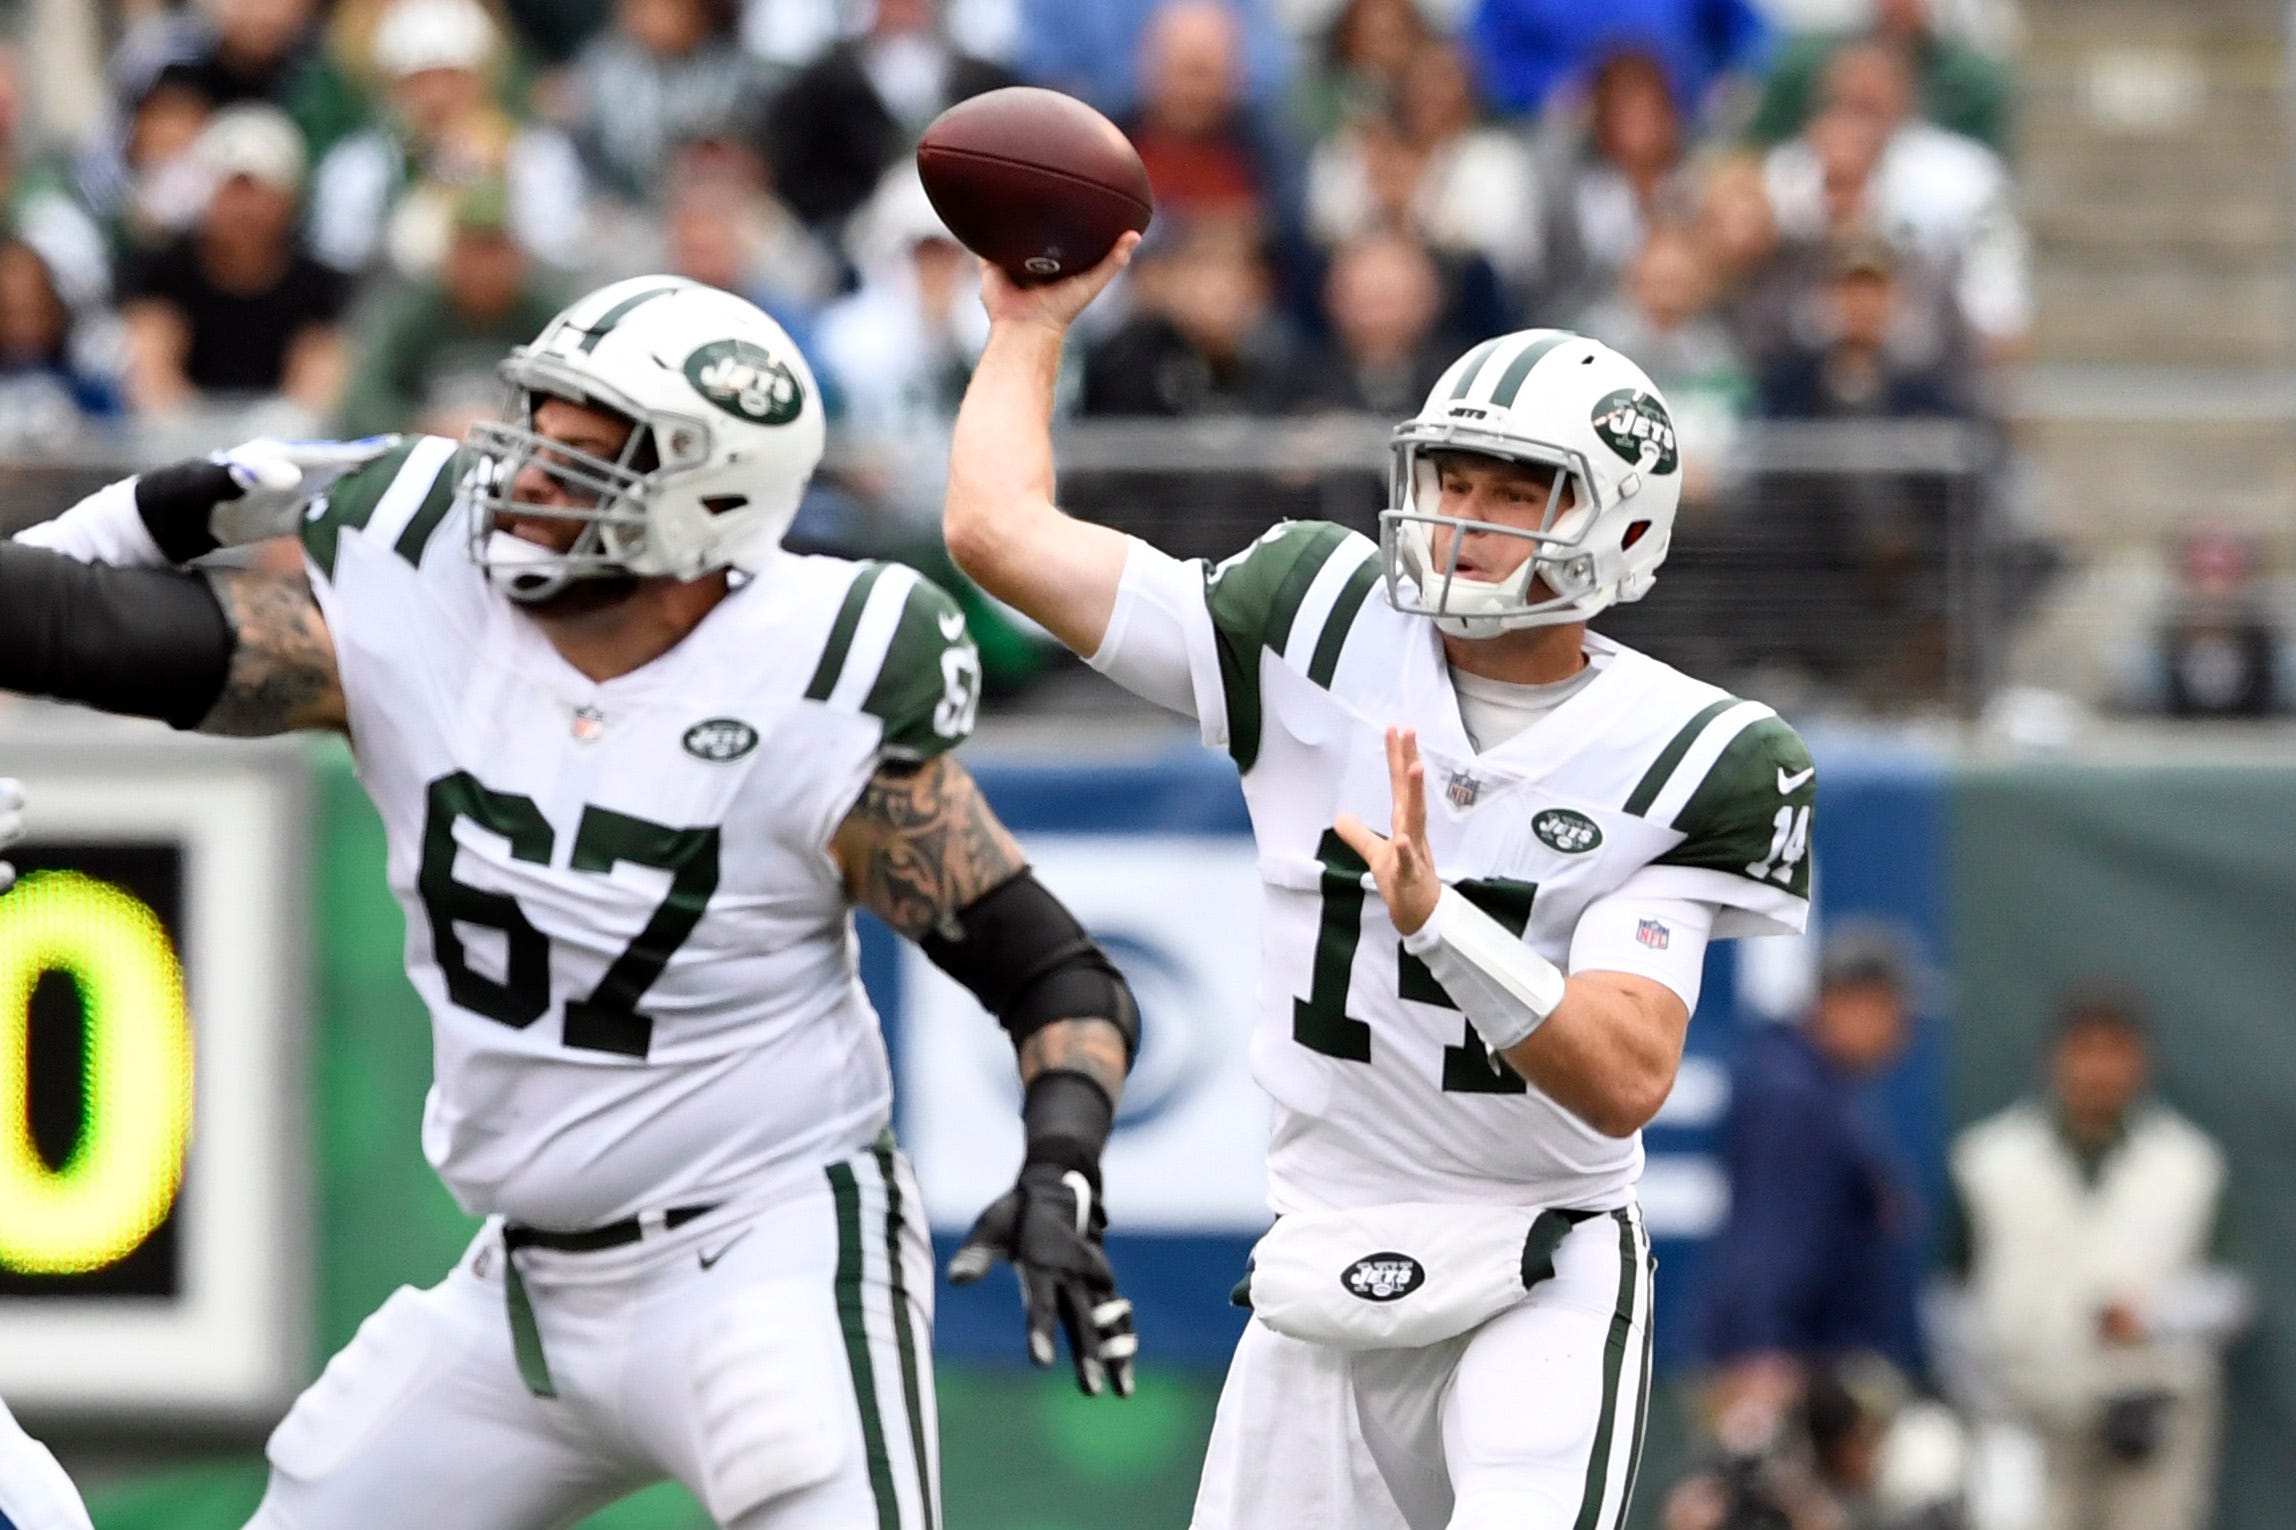 NY Jets: Does the banged-up offensive line have time to build chemistry before Week 1?